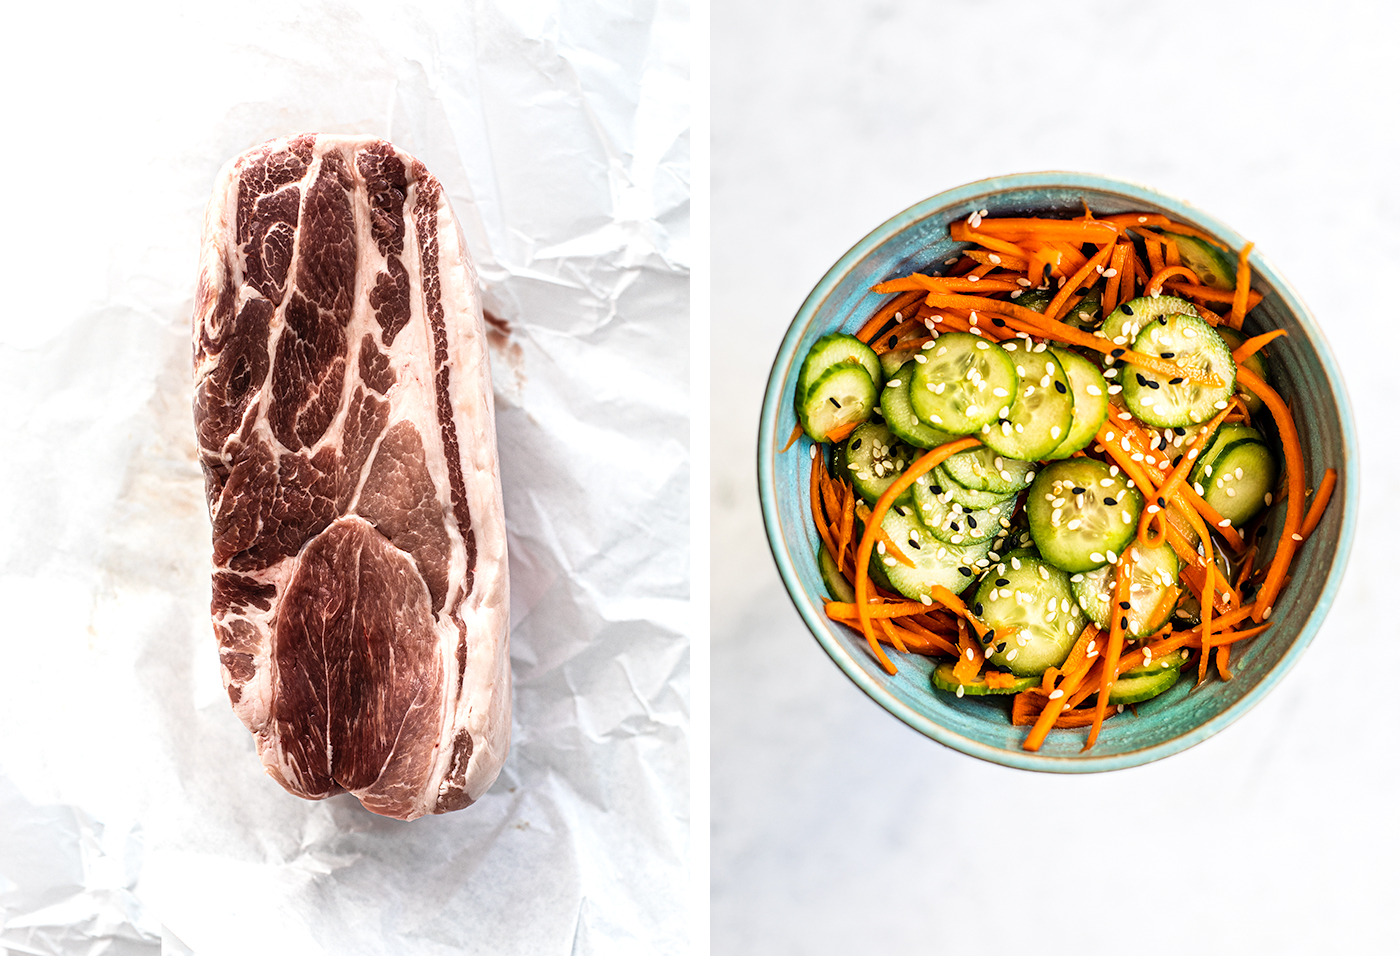 Left: raw pork shoulder on butchers paper; right: bowl of cucumber and carrot slaw.